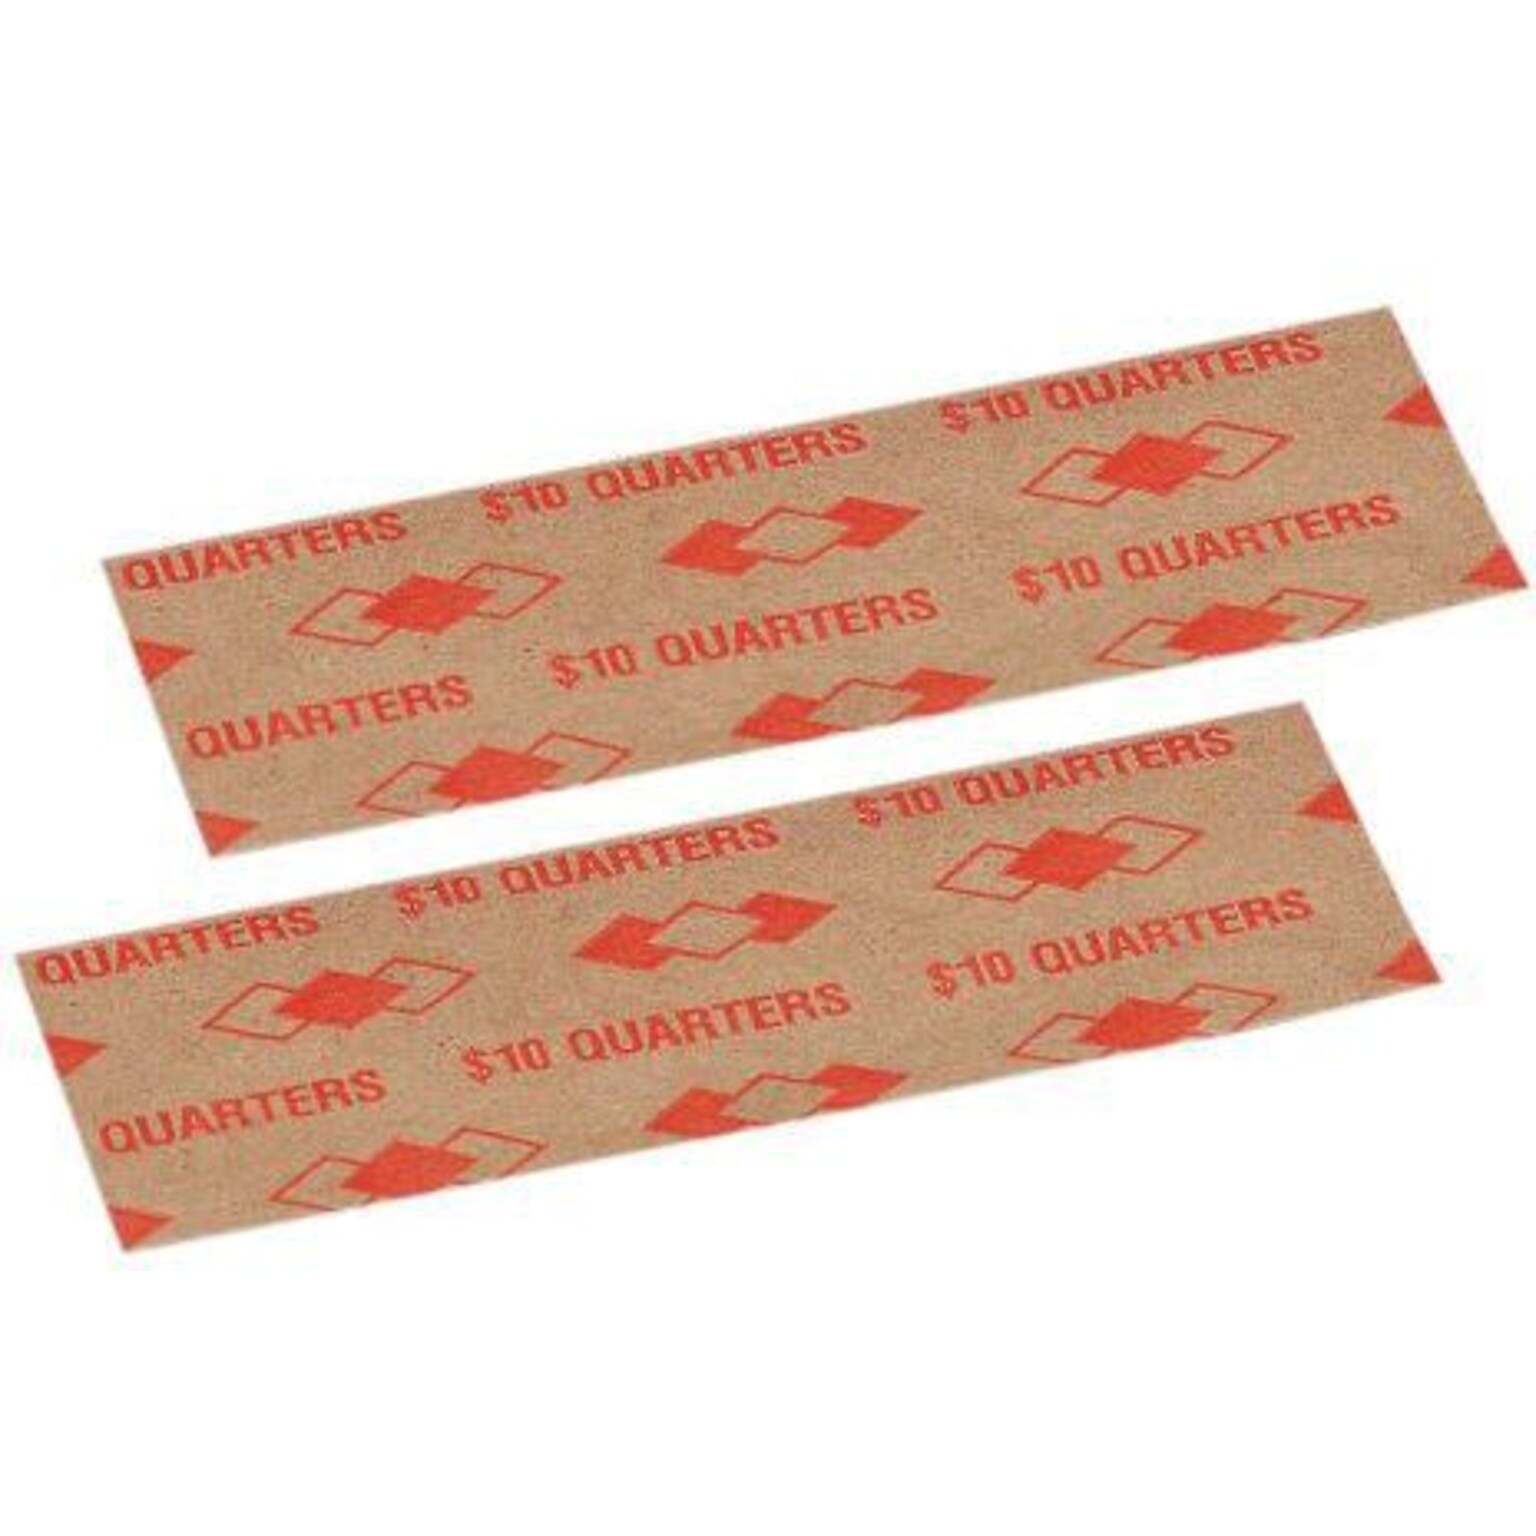 PM Company Tubular Flat Paper Coin Wrappers for 40 Quarters, Orange, 1,000/Pk